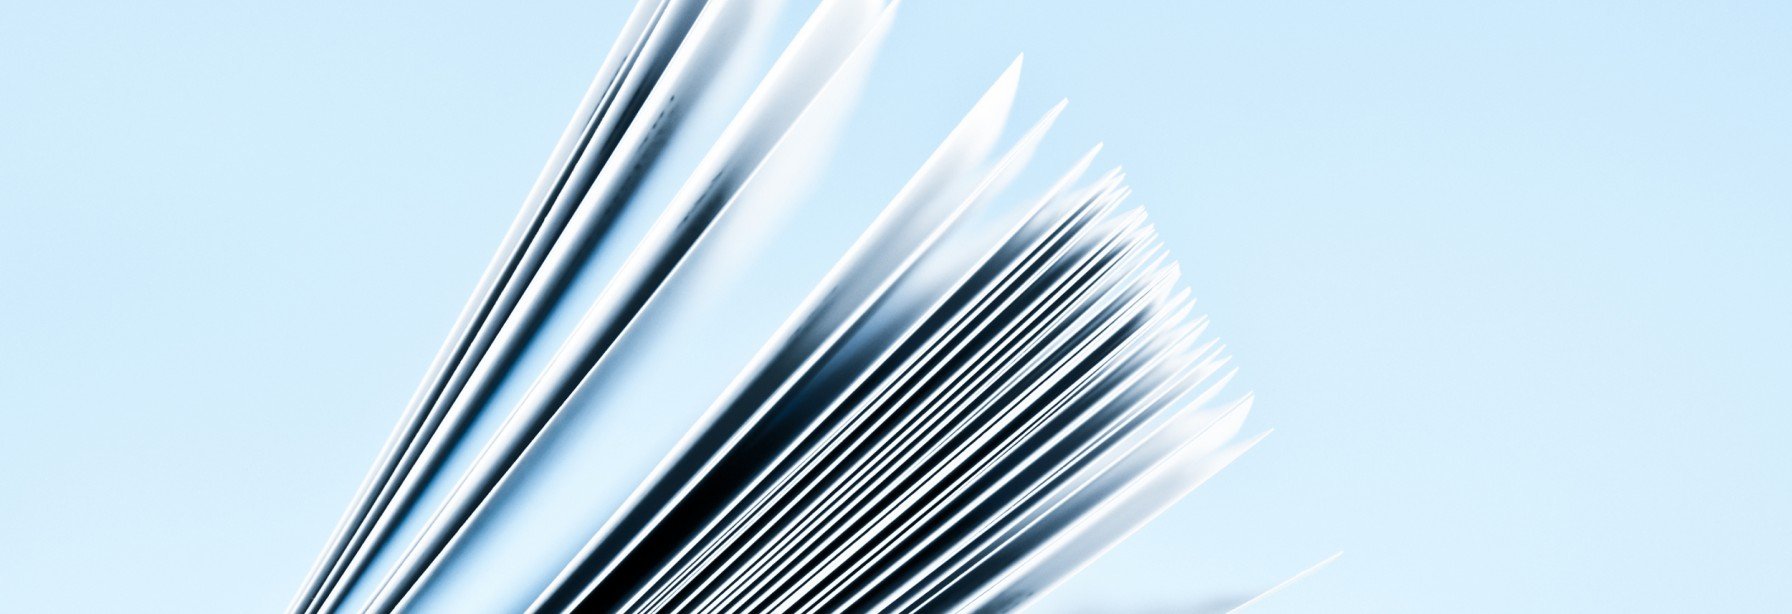 Stack of papers on a blue background